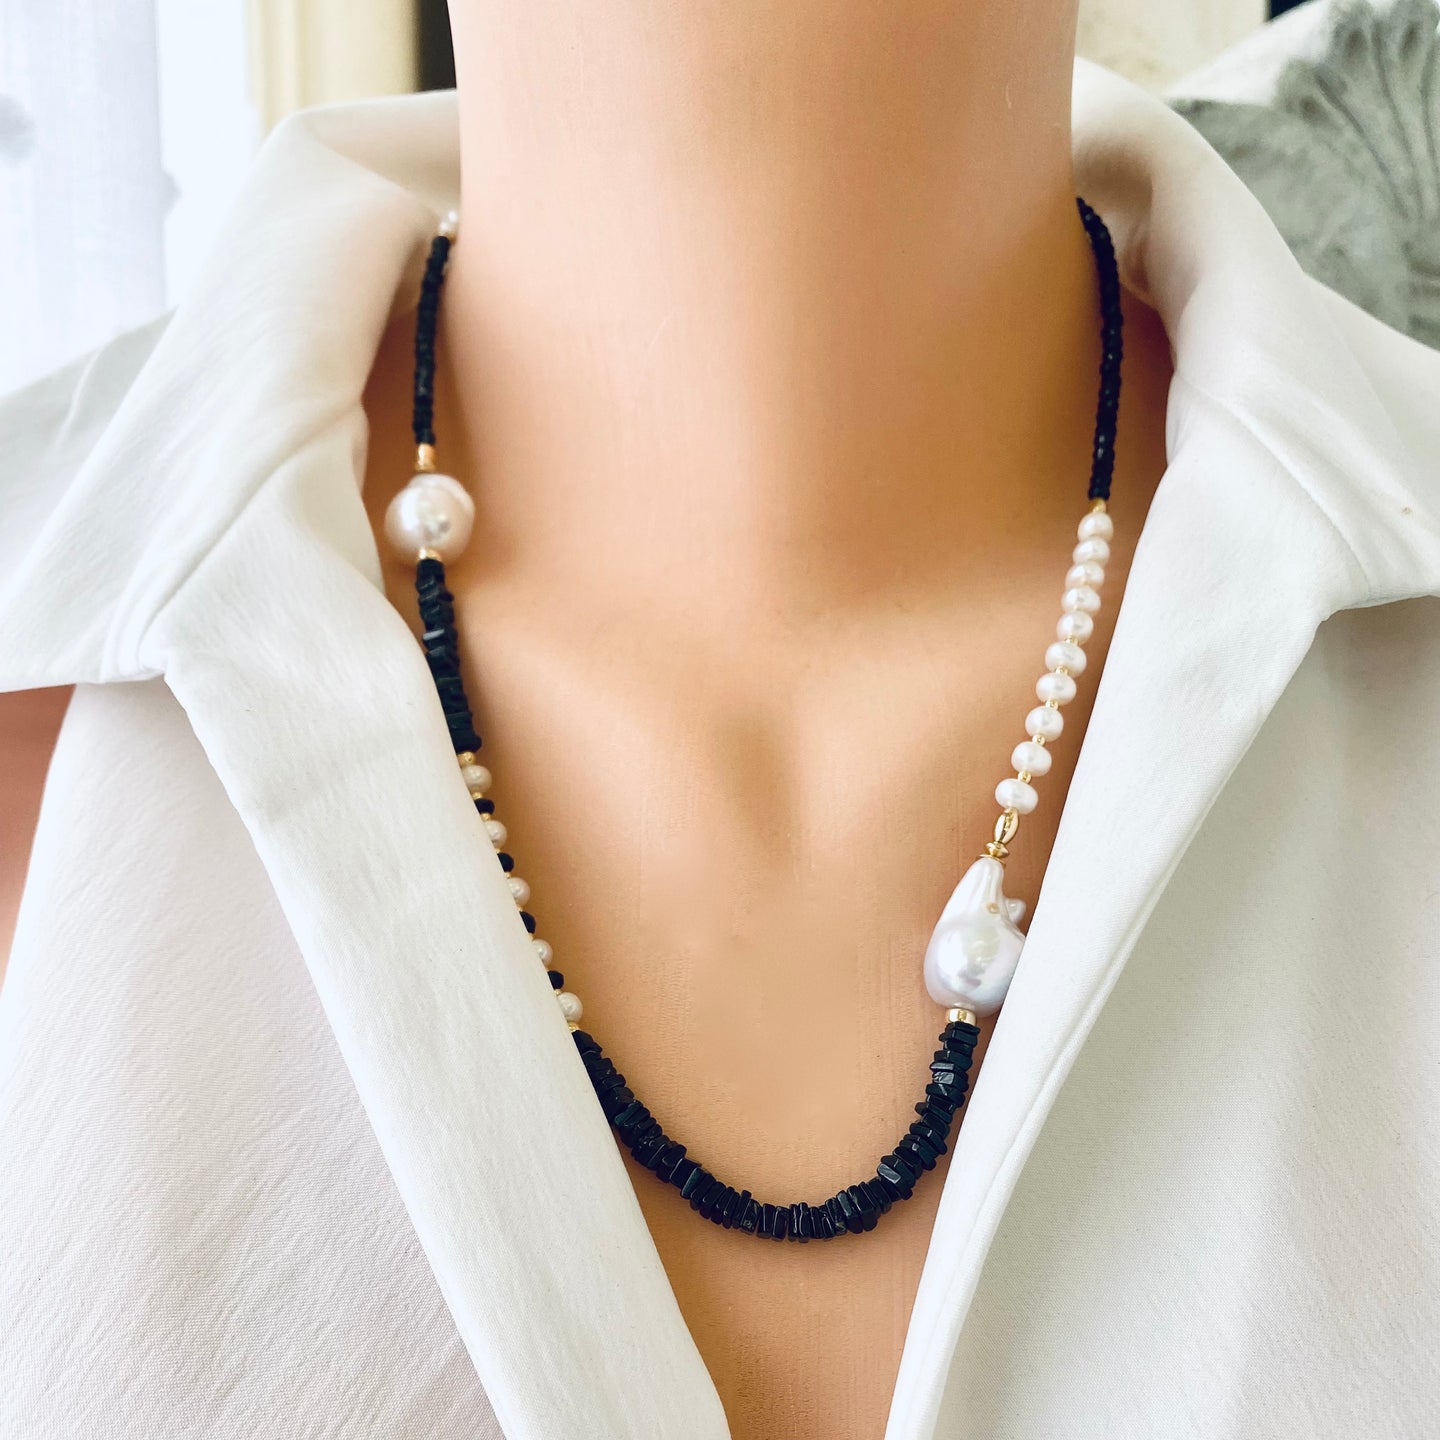 Asymmetric Black Spinel & Freshwater Baroque Pearl Necklace, Gold Filled, 21.5